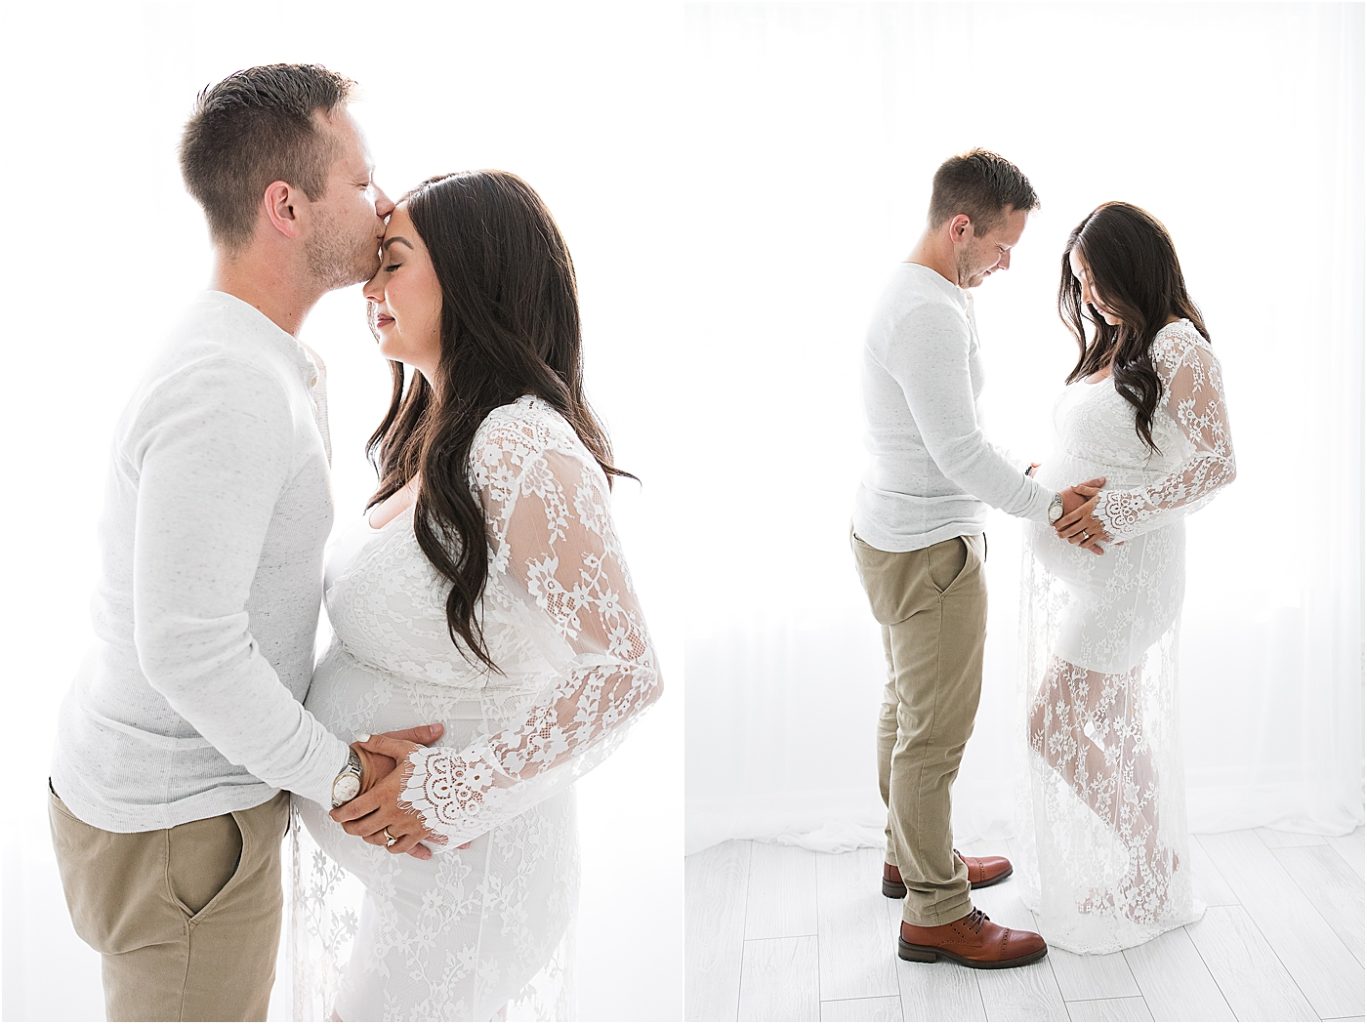 Studio maternity session in Fishers Indiana with Lindsay Konopa Photography.